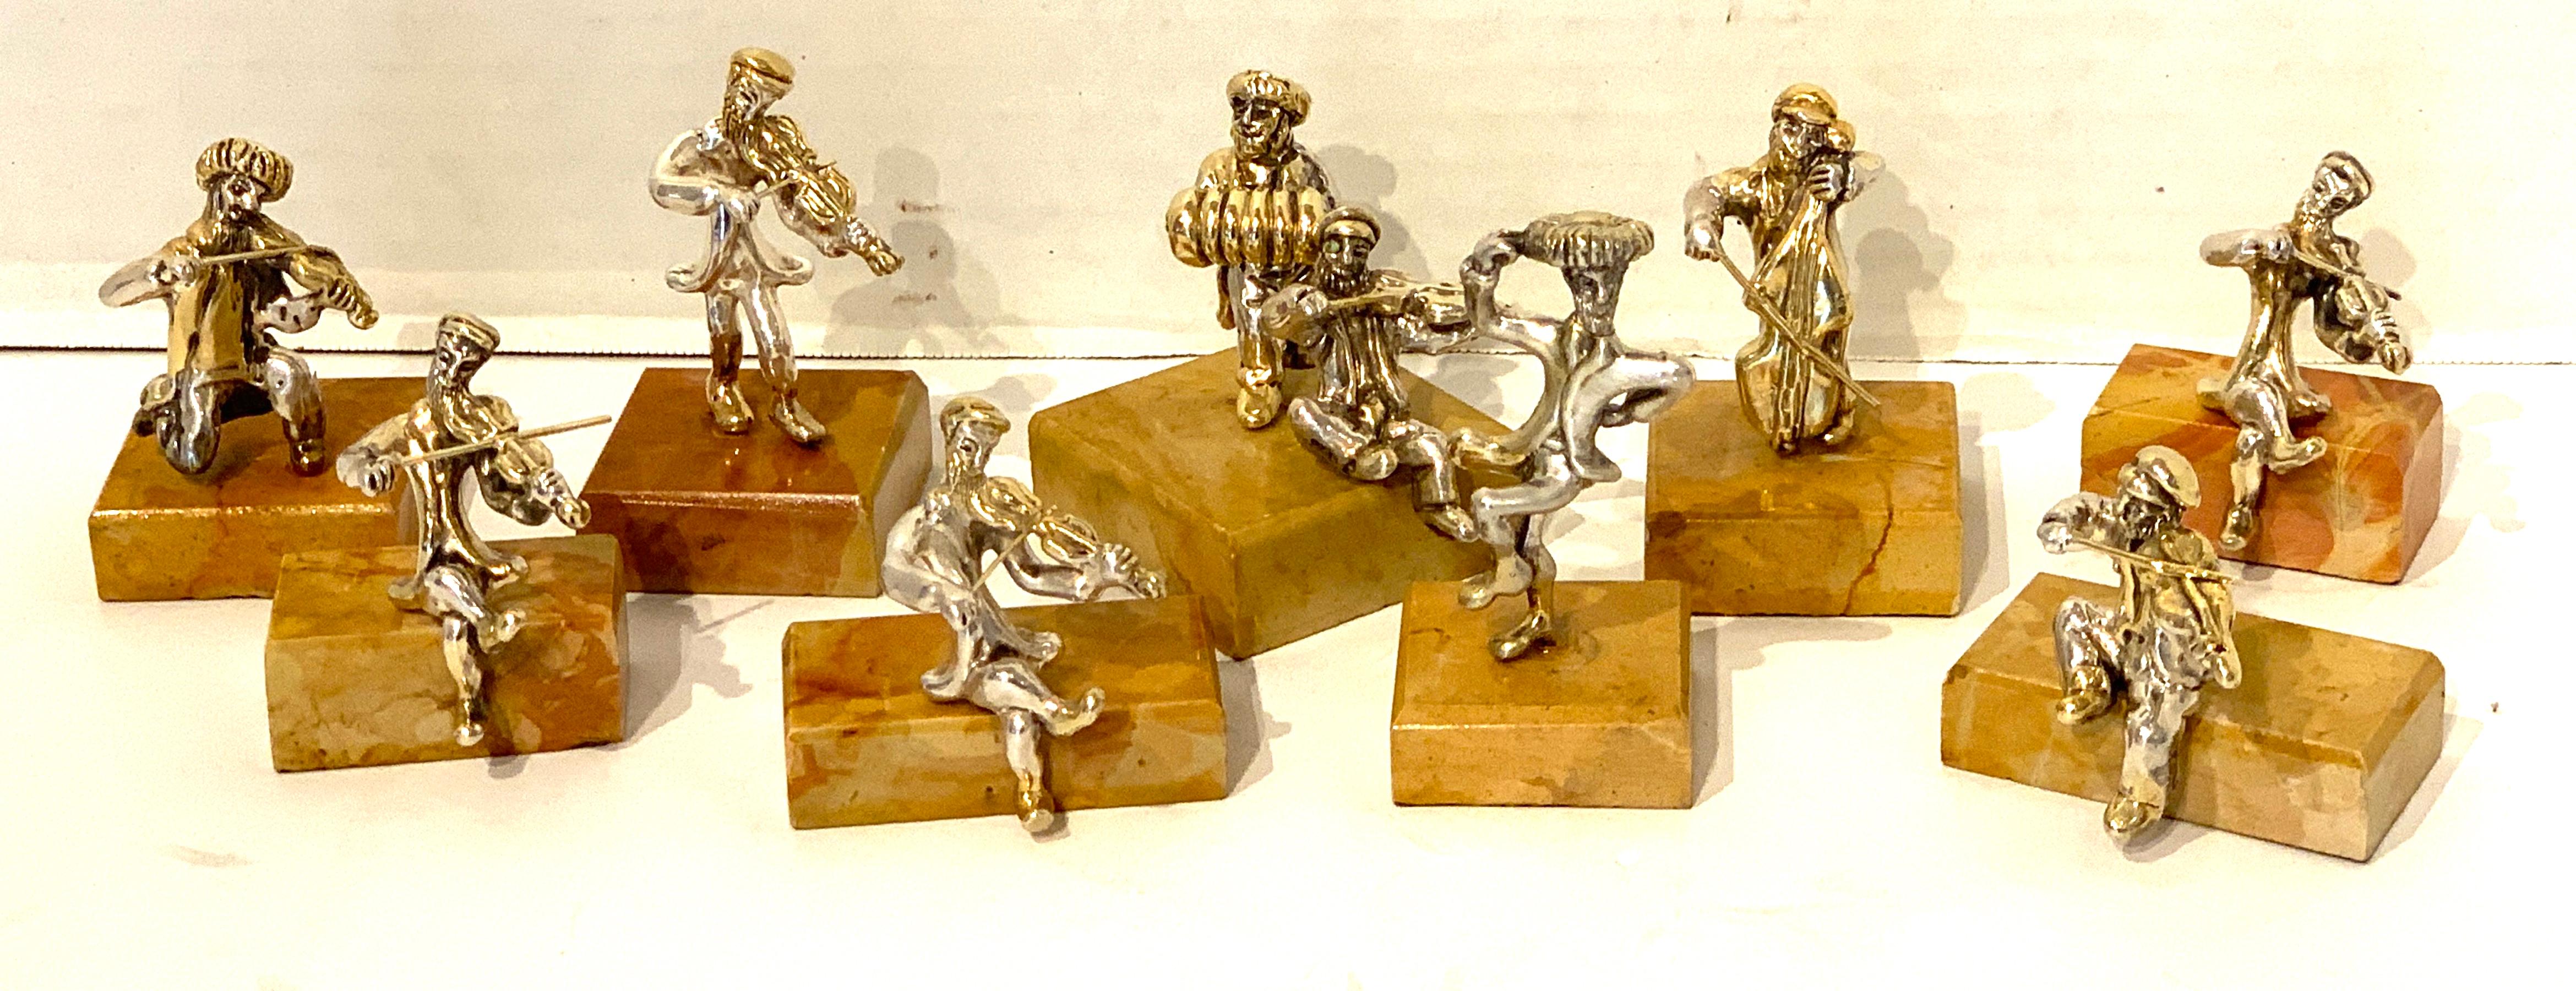 Nine Sam Philipe gilt sterling Judaica sculptures, consisting of one double and eight single sculptures, of various musicians and dancers. Each one realistically cast and modeled, some with gilt vermeil detail, all raised on marble cube bases.